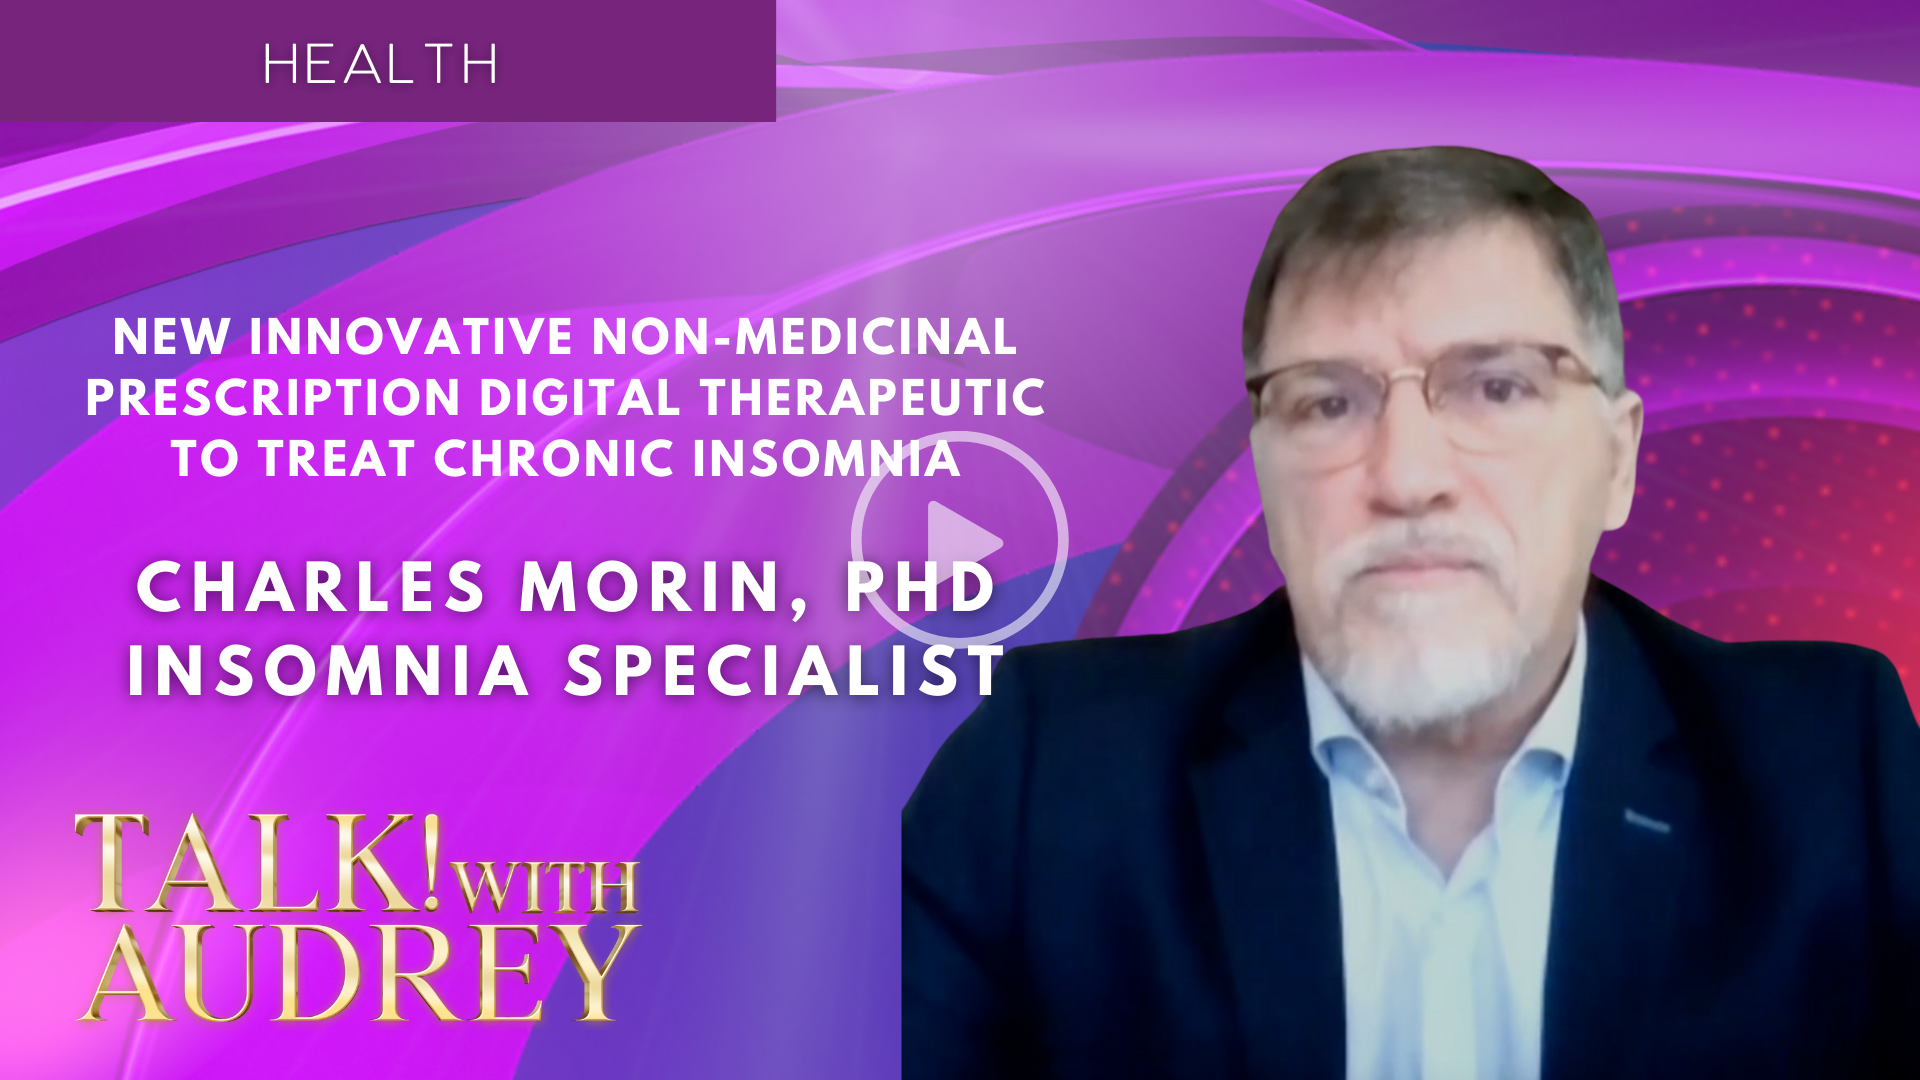 Dr. Charles Morin - TALK! with AUDREY